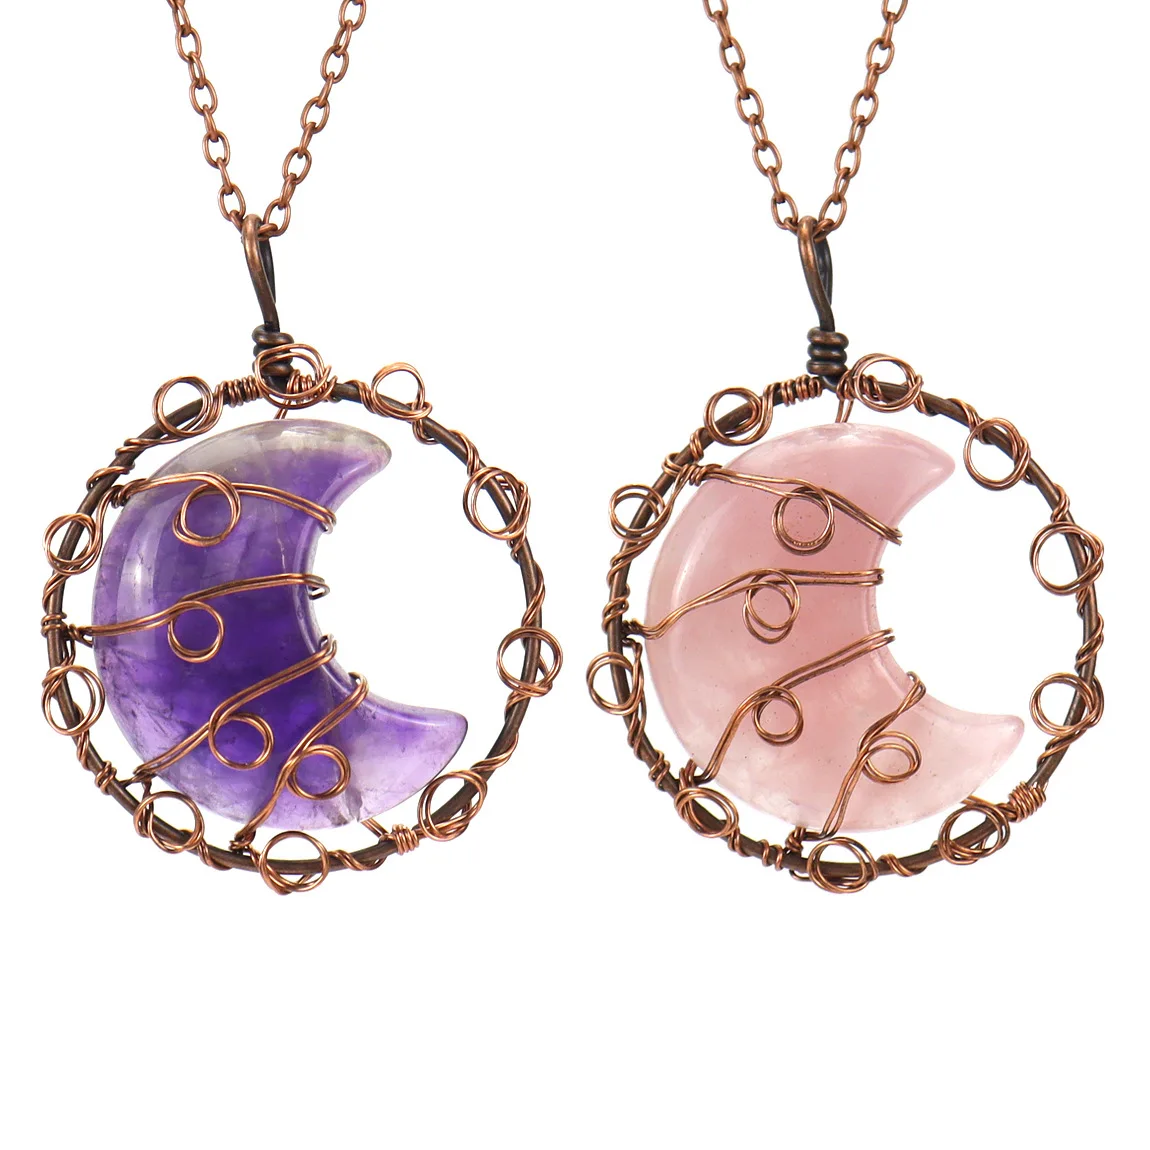 Hand-made Copper Wire Wrap Amethyst Rose Quartz Pendant Neckl Chain Retro Circular Hollow Crescent Necklace For Couples Gift